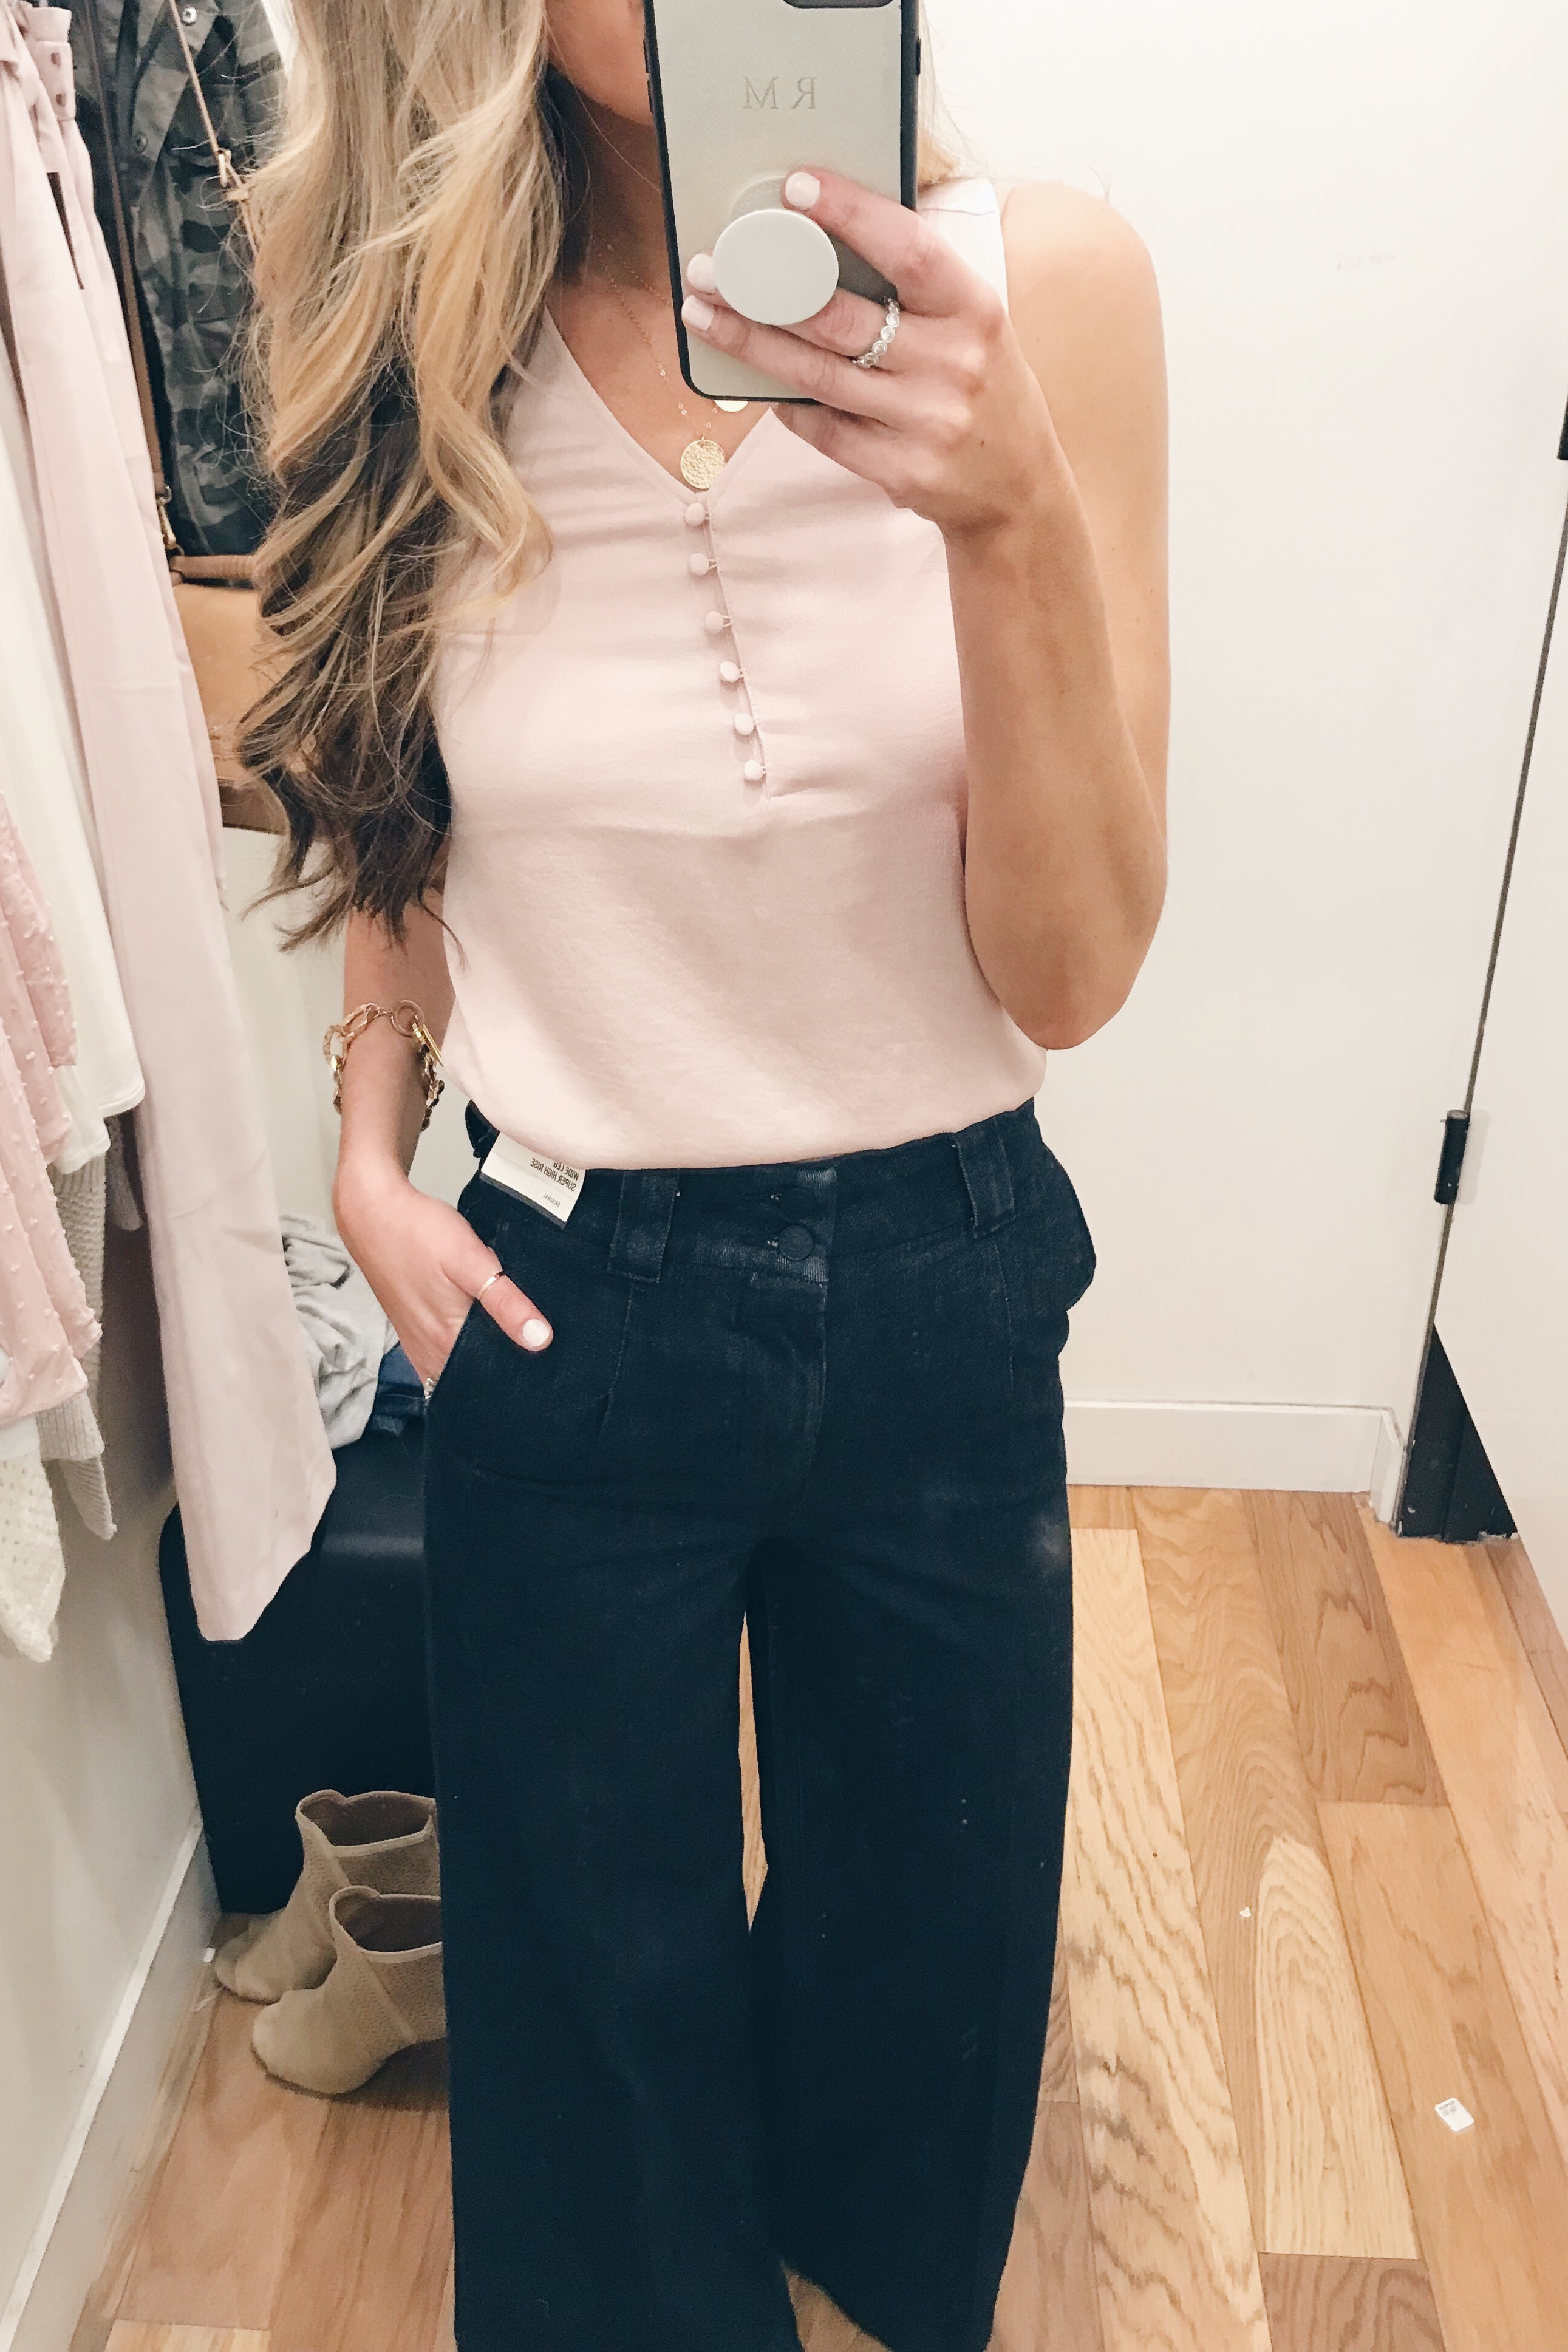 express sale try on - march 2019 - wide leg jeans and button front tank